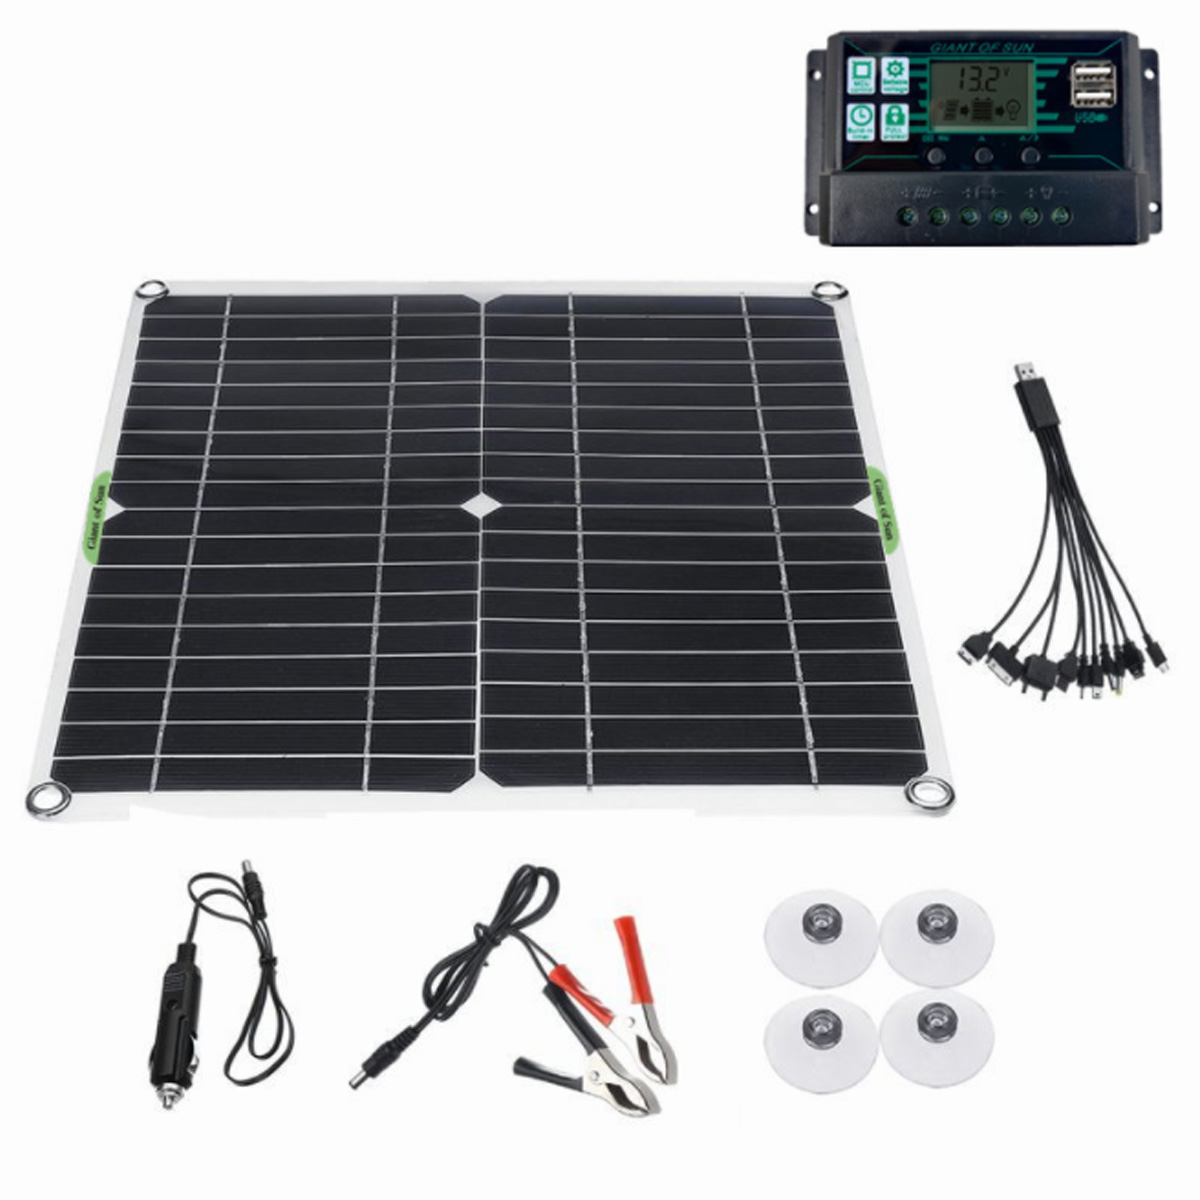 100W-Solar-Panel-Kit-12V-Battery-Charger-10-100A-Controller-For-Ship-Motorcycles-Boat-1839778-1